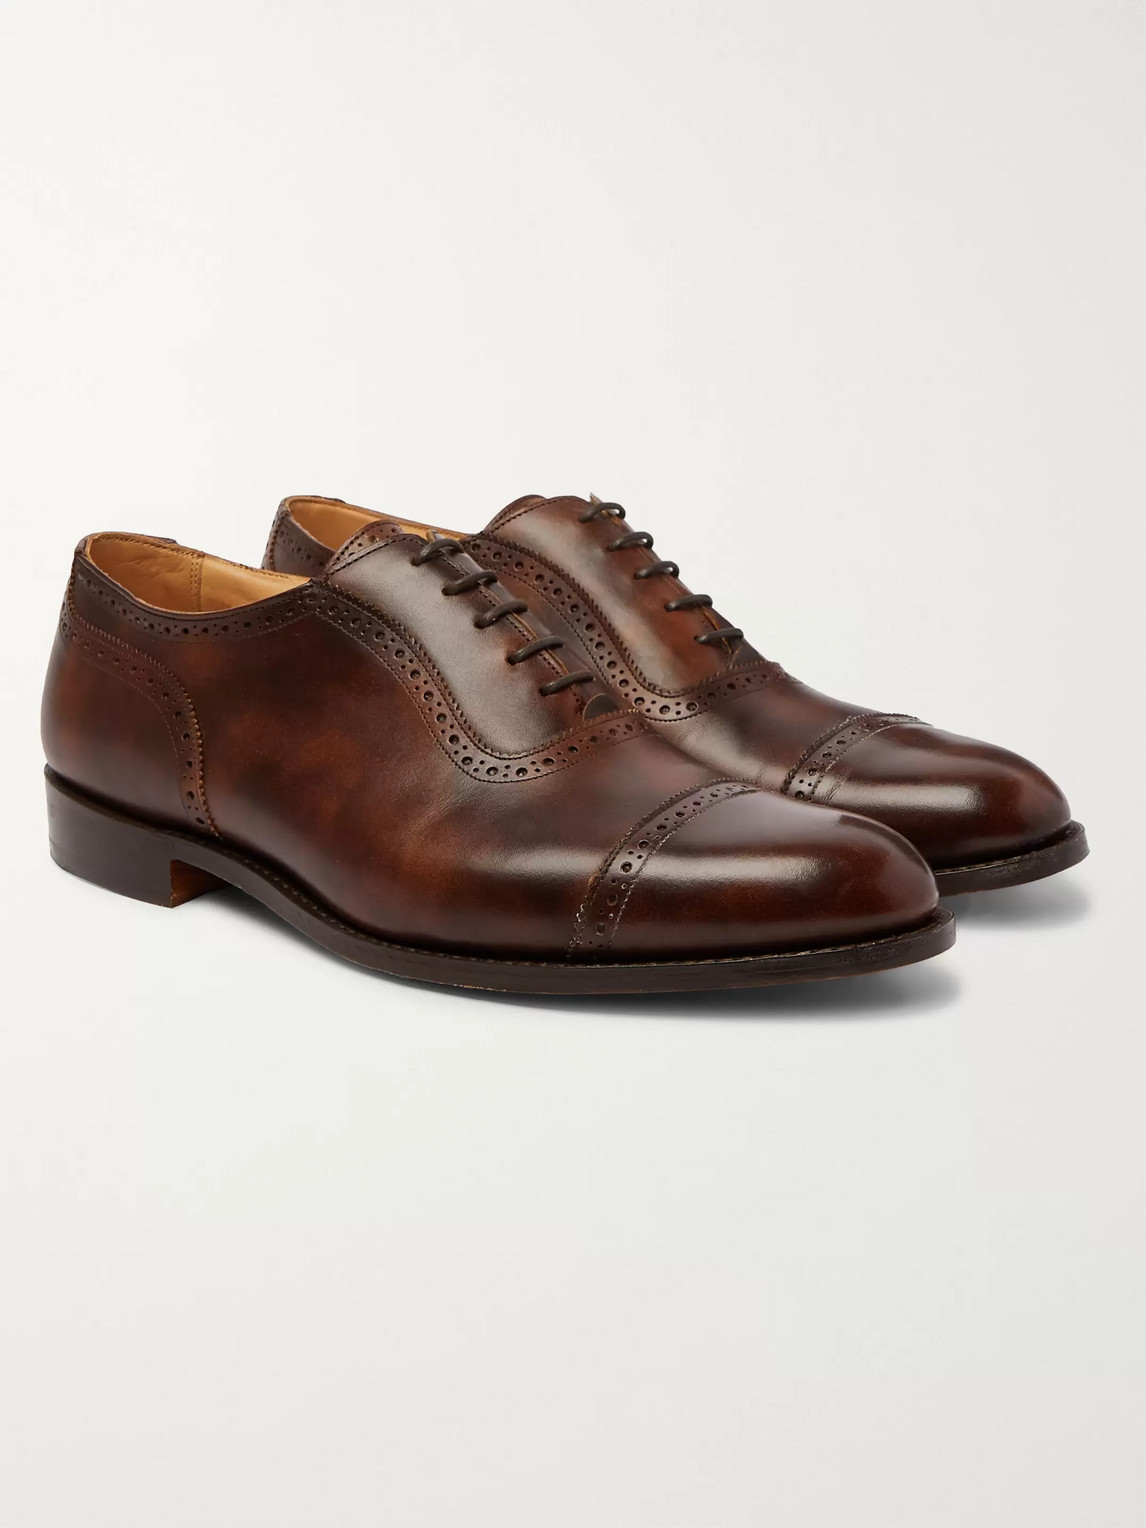 Tricker's Trenton Cap-toe Leather Oxford Brogues In Brown